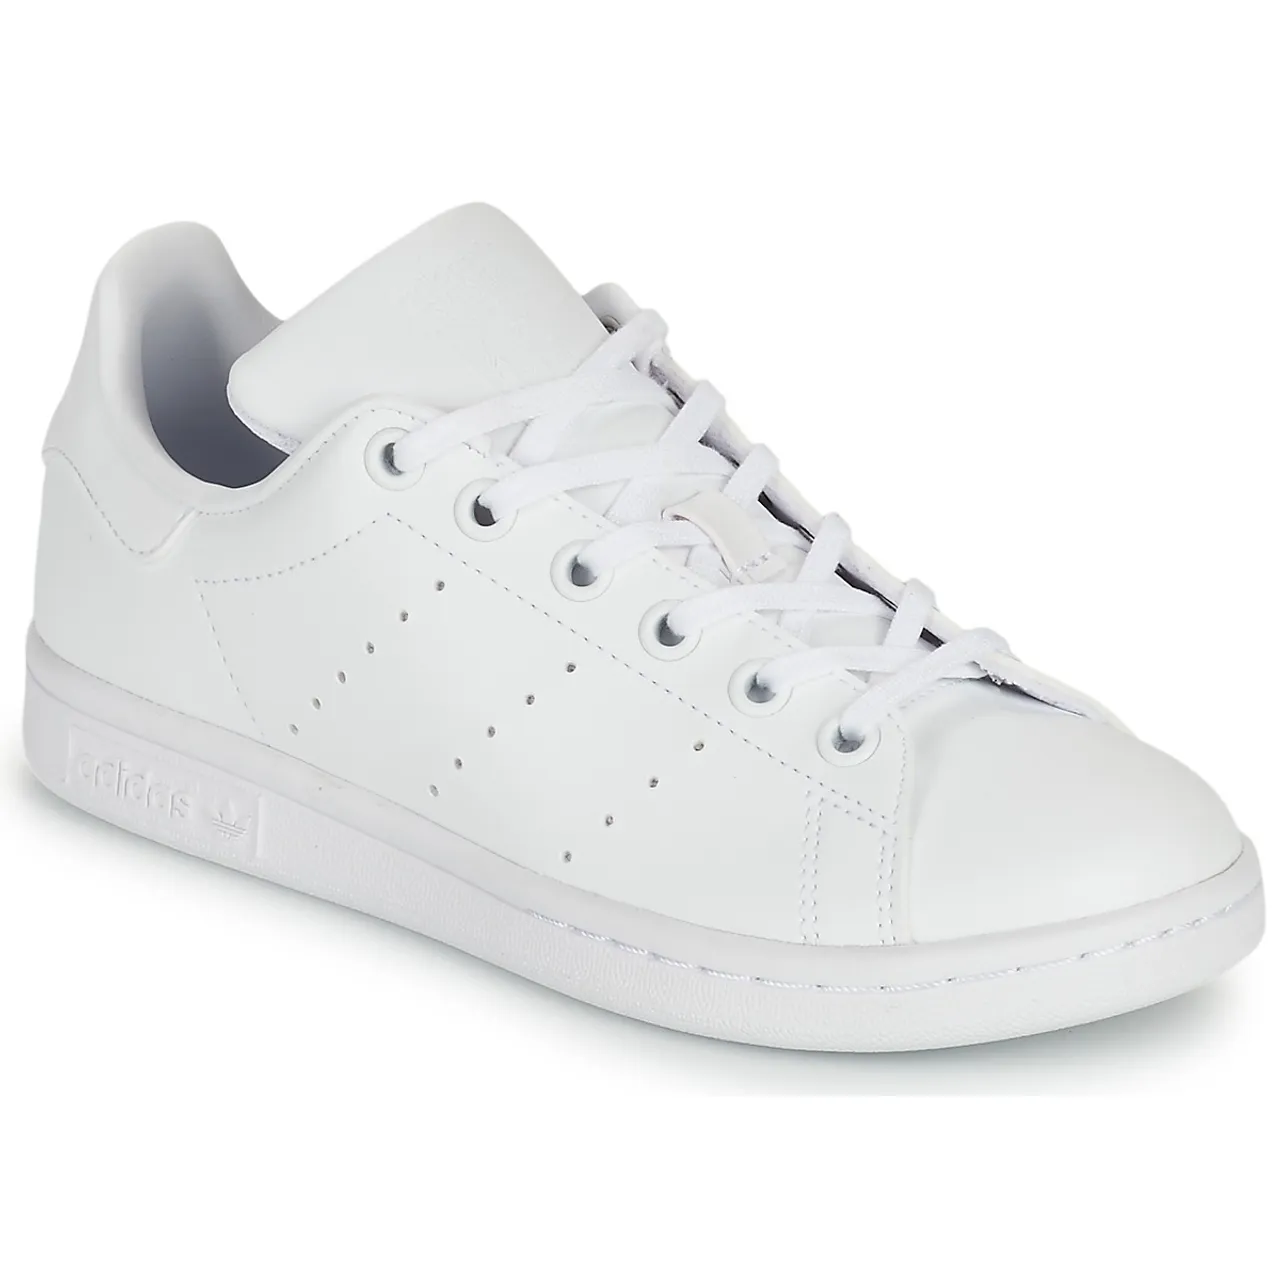 adidas  STAN SMITH J SUSTAINABLE  boys's Children's Shoes (Trainers) in White